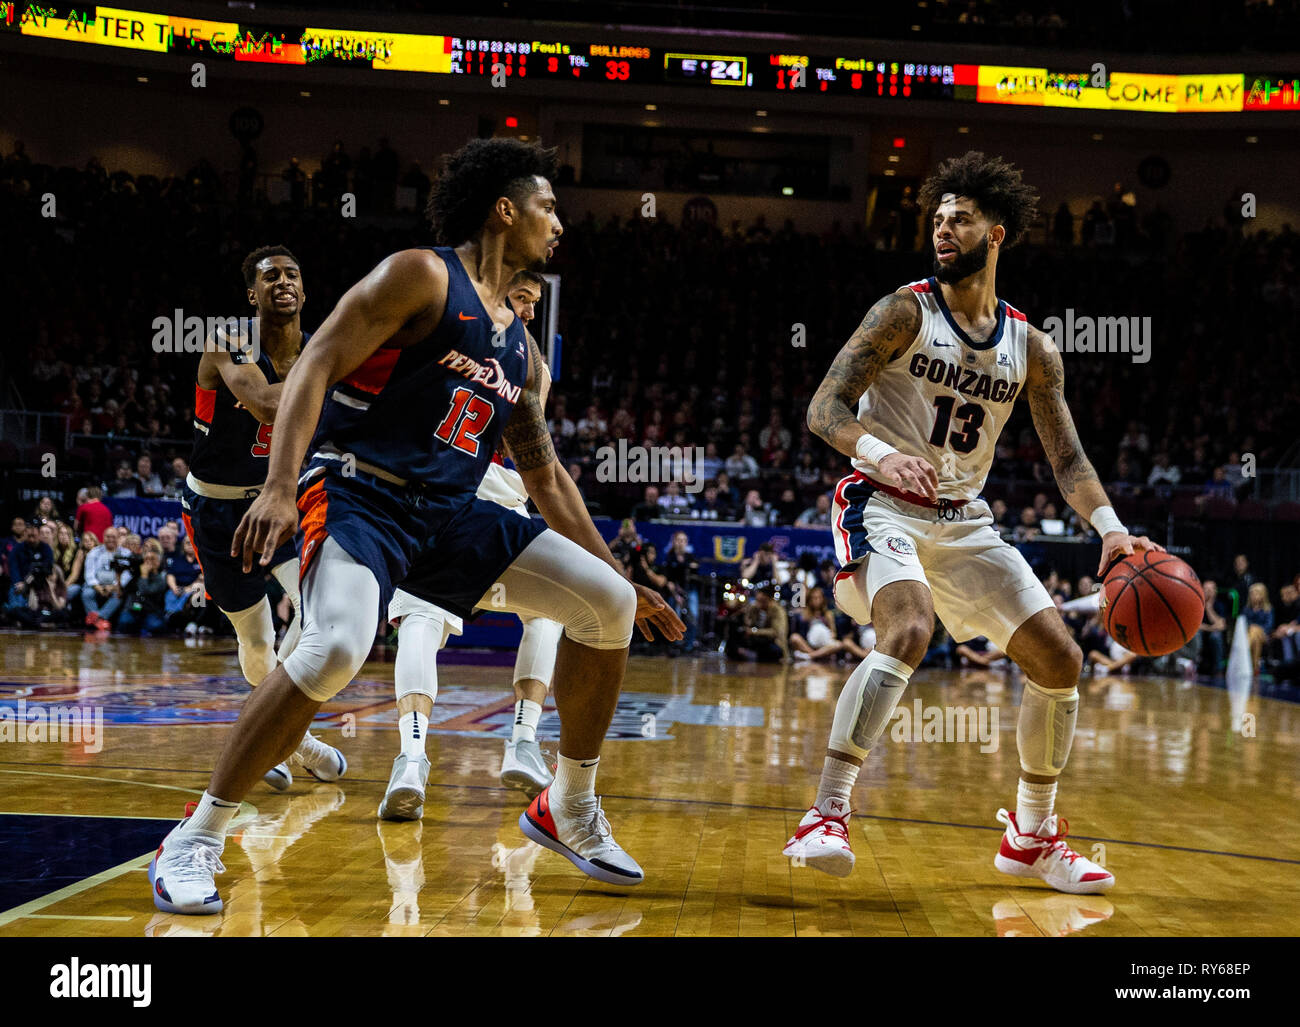 Mar 11 2019 Las Vegas, NV, U.S.A. Gonzaga guard Josh Perkins (13) looks to pass the ball during the NCAA West Coast Conference Men's Basketball Tournament semi -final between the Pepperdine Wave and the Gonzaga Bulldogs 100-74 win at Orleans Arena Las Vegas, NV. Thurman James/CSM Stock Photo